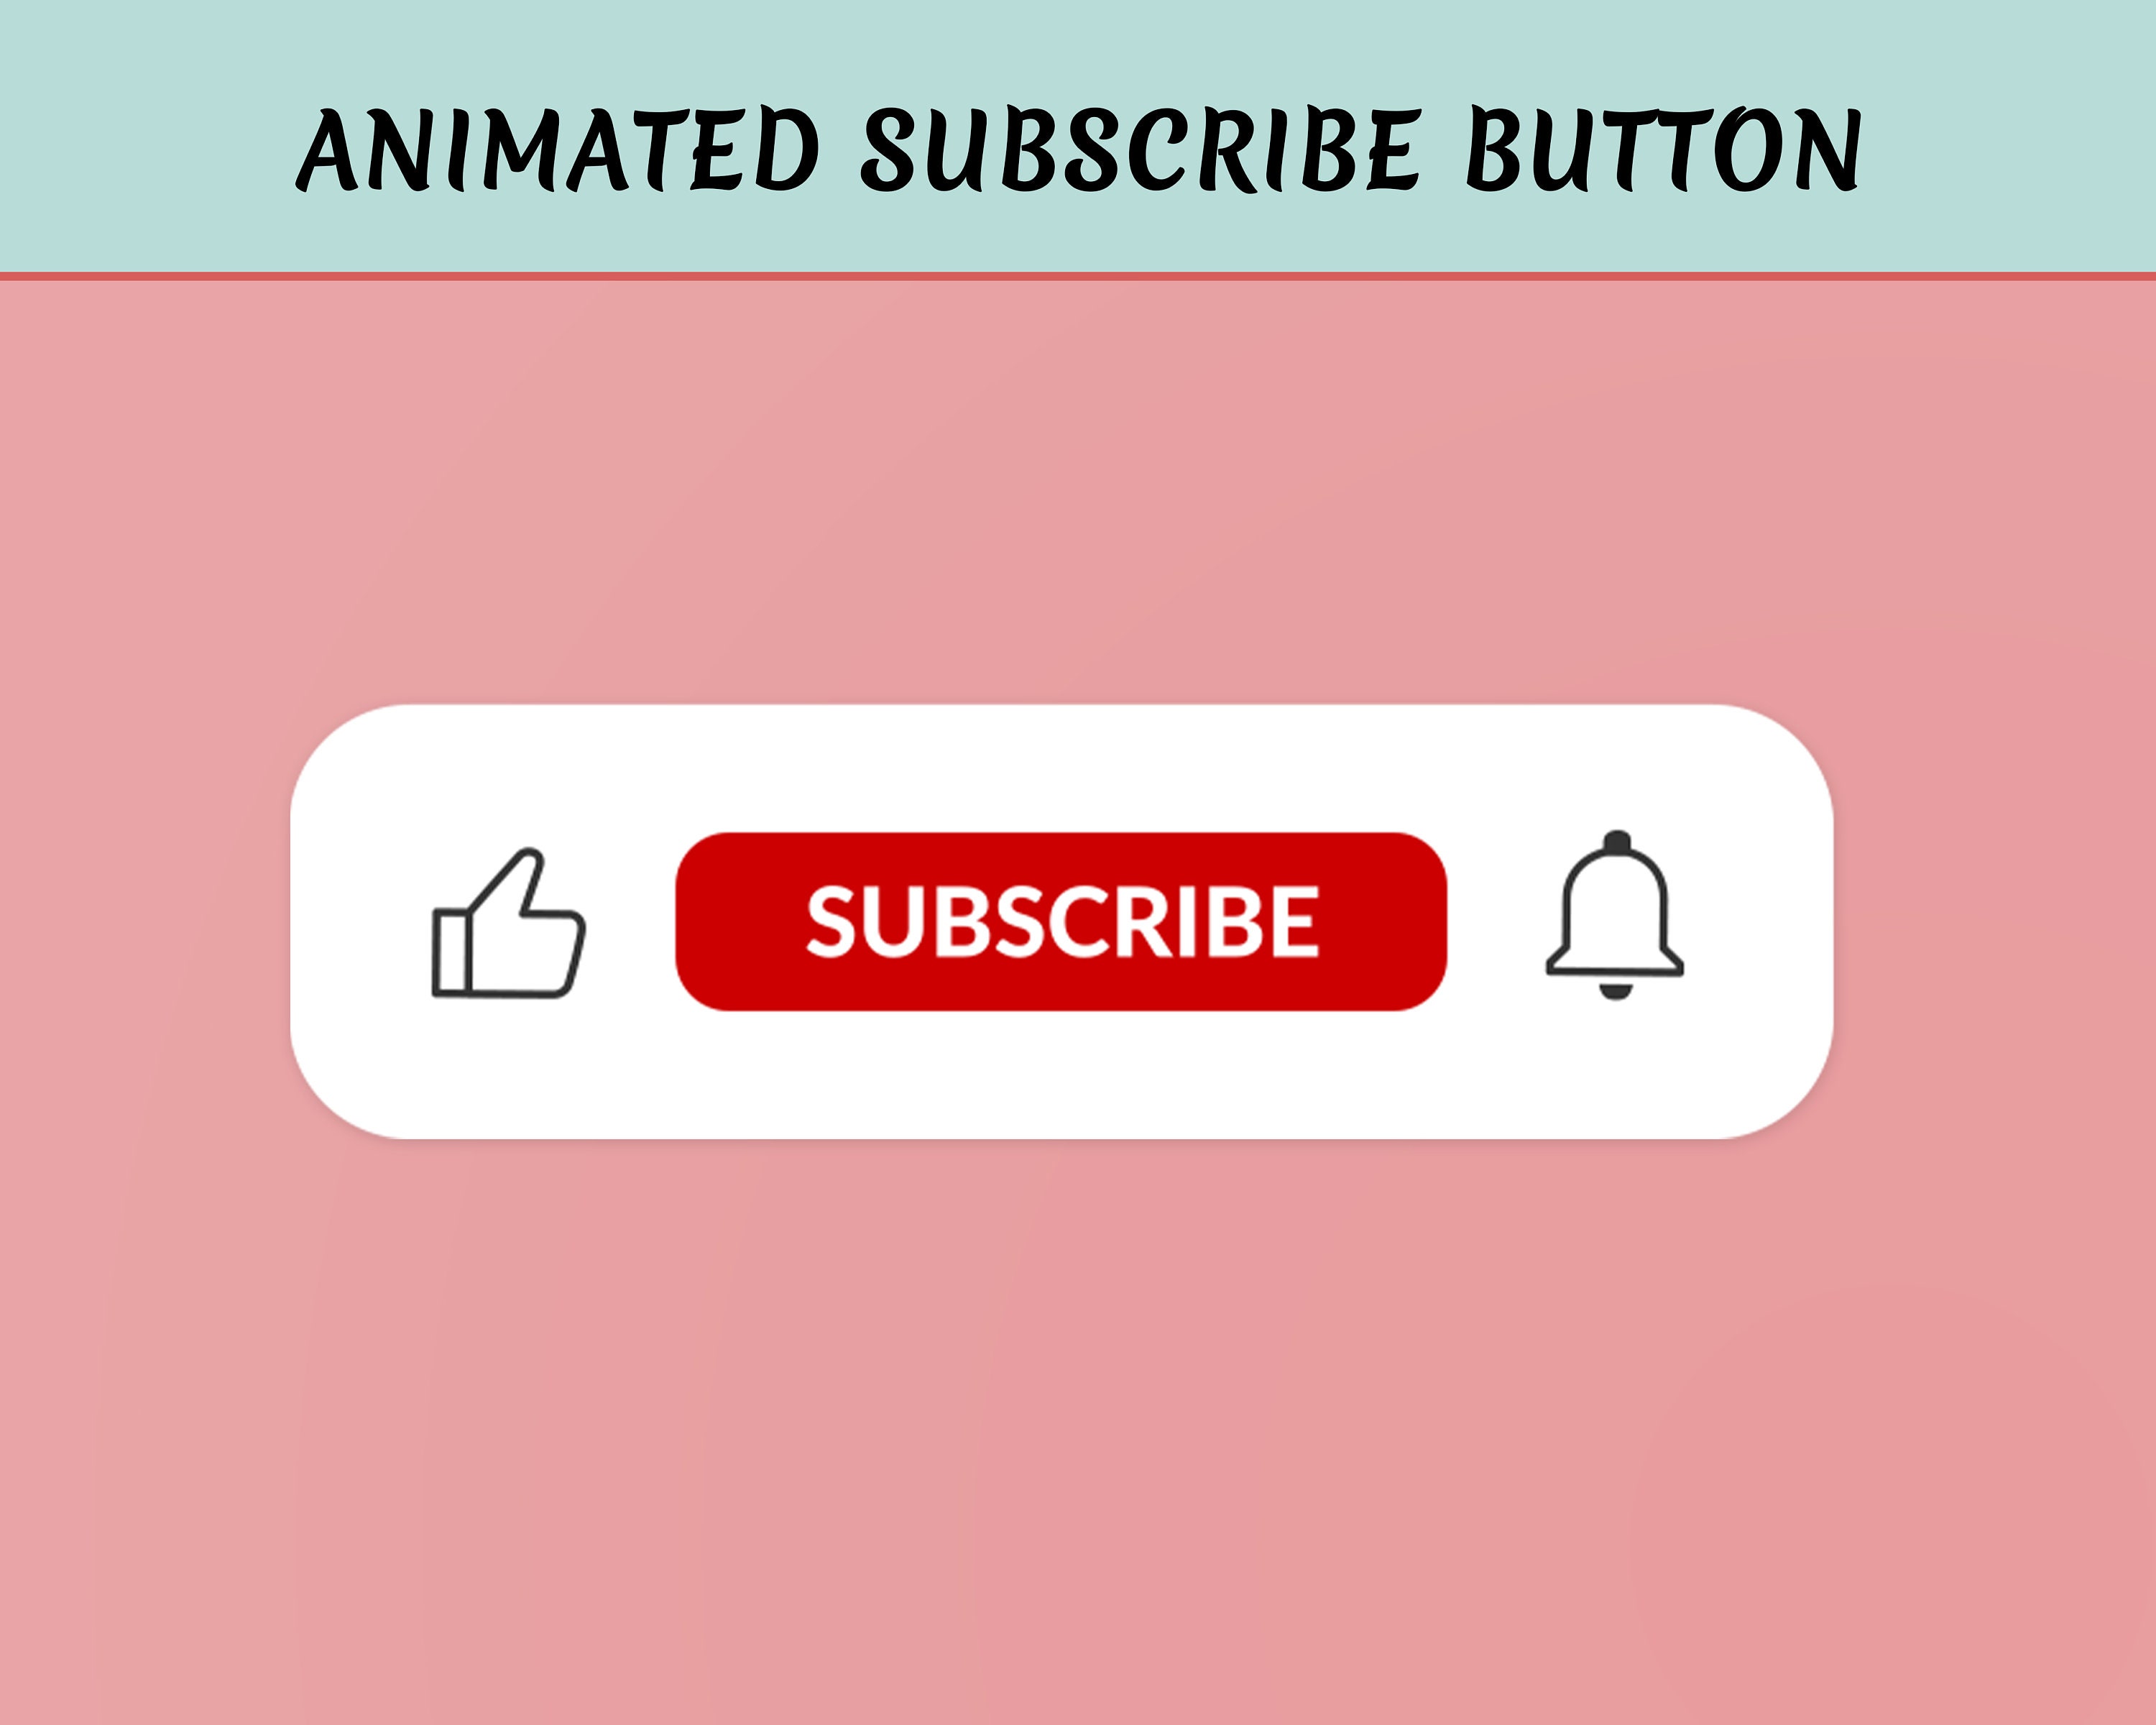 Animated Subscribe Button Animation for Youtube Channel - Etsy